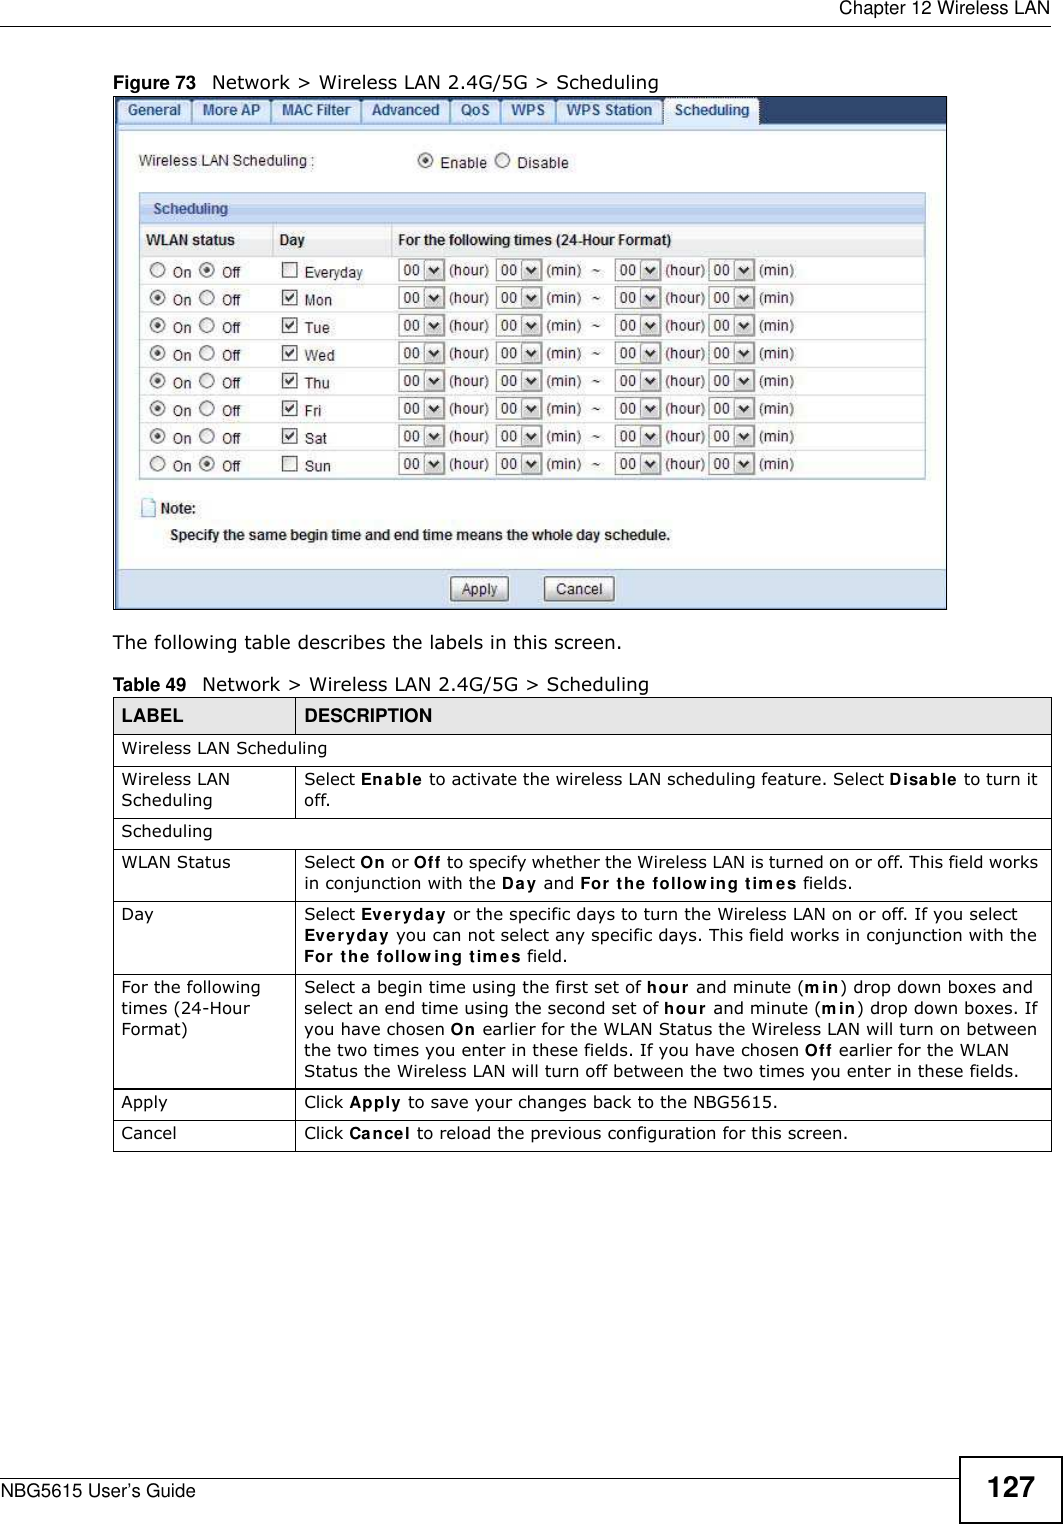  Chapter 12 Wireless LANNBG5615 User’s Guide 127Figure 73   Network &gt; Wireless LAN 2.4G/5G &gt; SchedulingThe following table describes the labels in this screen.Table 49   Network &gt; Wireless LAN 2.4G/5G &gt; SchedulingLABEL DESCRIPTIONWireless LAN SchedulingWireless LAN SchedulingSelect Enable to activate the wireless LAN scheduling feature. Select Disable to turn it off.SchedulingWLAN Status Select On or Off to specify whether the Wireless LAN is turned on or off. This field works in conjunction with the Day and For the follow ing tim es fields.Day Select Everyday or the specific days to turn the Wireless LAN on or off. If you select Everyday you can not select any specific days. This field works in conjunction with the For the follow ing tim es field.For the following times (24-Hour Format)Select a begin time using the first set of hour and minute (m in) drop down boxes and select an end time using the second set of hour and minute (m in) drop down boxes. If you have chosen On earlier for the WLAN Status the Wireless LAN will turn on between the two times you enter in these fields. If you have chosen Off earlier for the WLAN Status the Wireless LAN will turn off between the two times you enter in these fields. Apply Click Apply to save your changes back to the NBG5615.Cancel Click Cancel to reload the previous configuration for this screen.